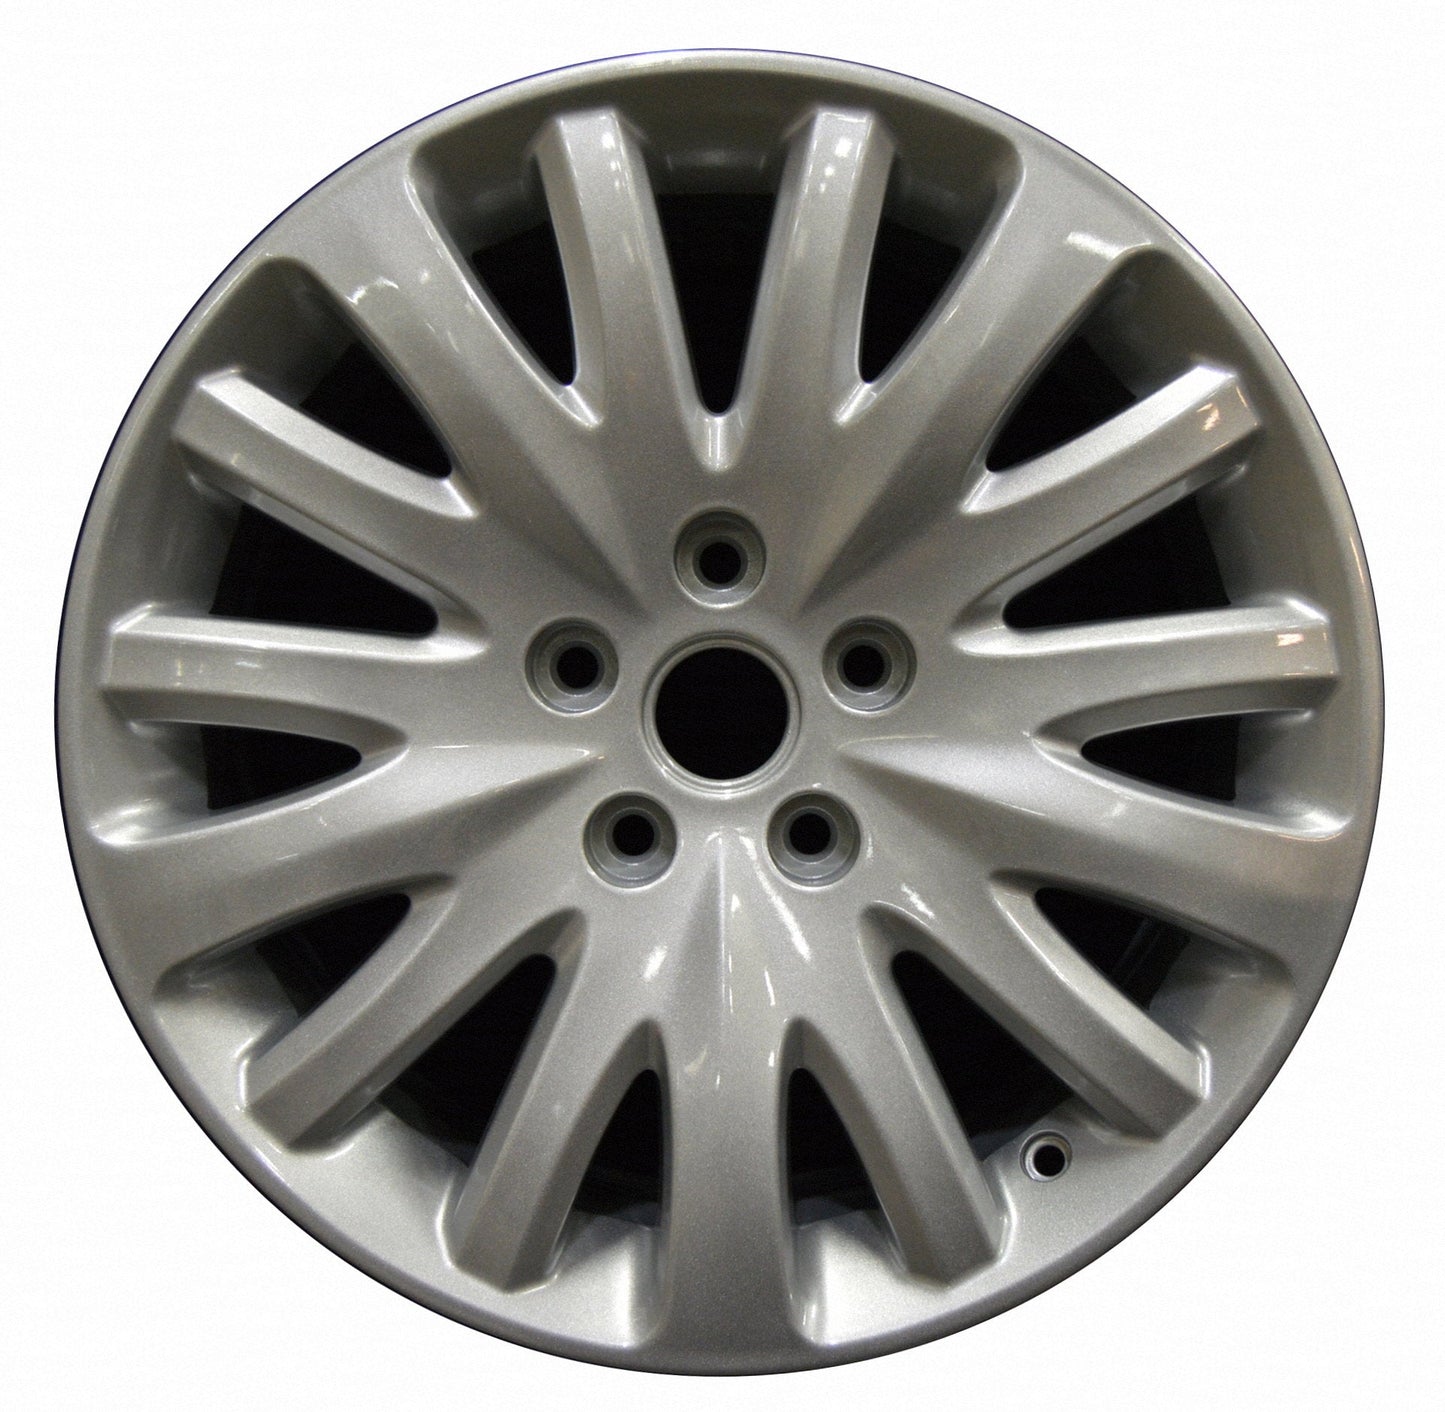 Ford Fusion  2010, 2011, 2012 Factory OEM Car Wheel Size 17x7.5 Alloy WAO.3799B.PS02.FF